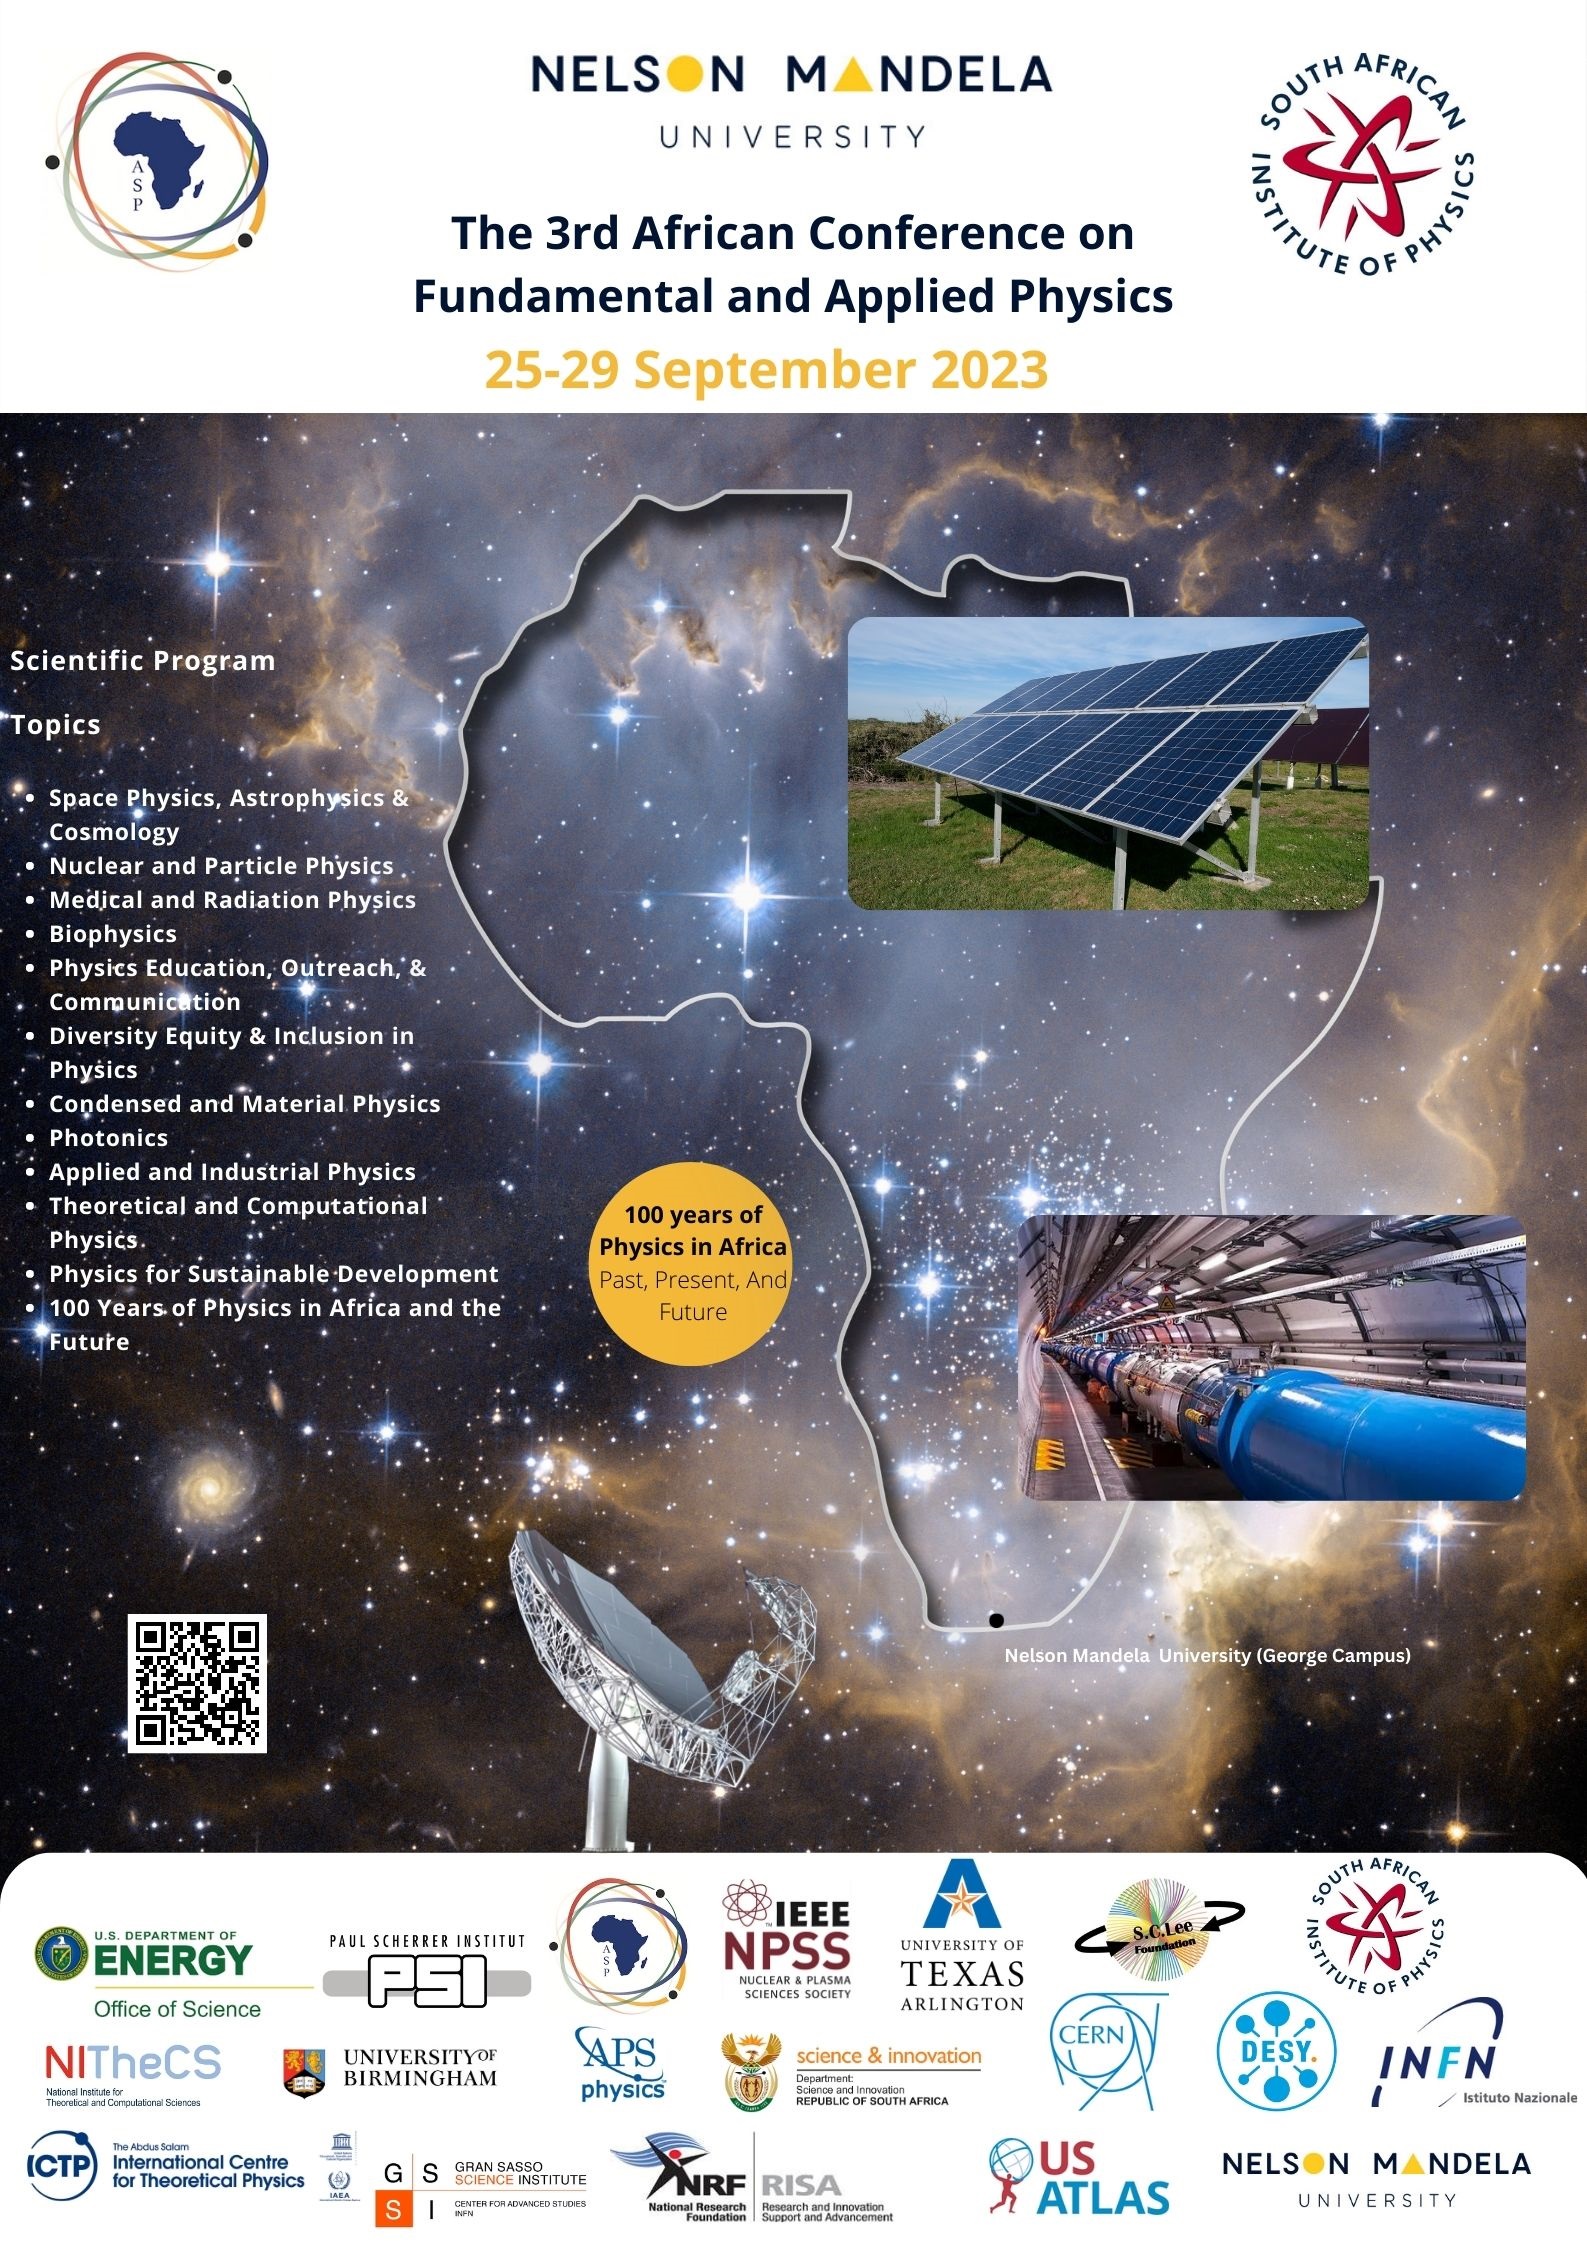 The 3rd African Conference on Fundamental and Applied Physics (ACP2023